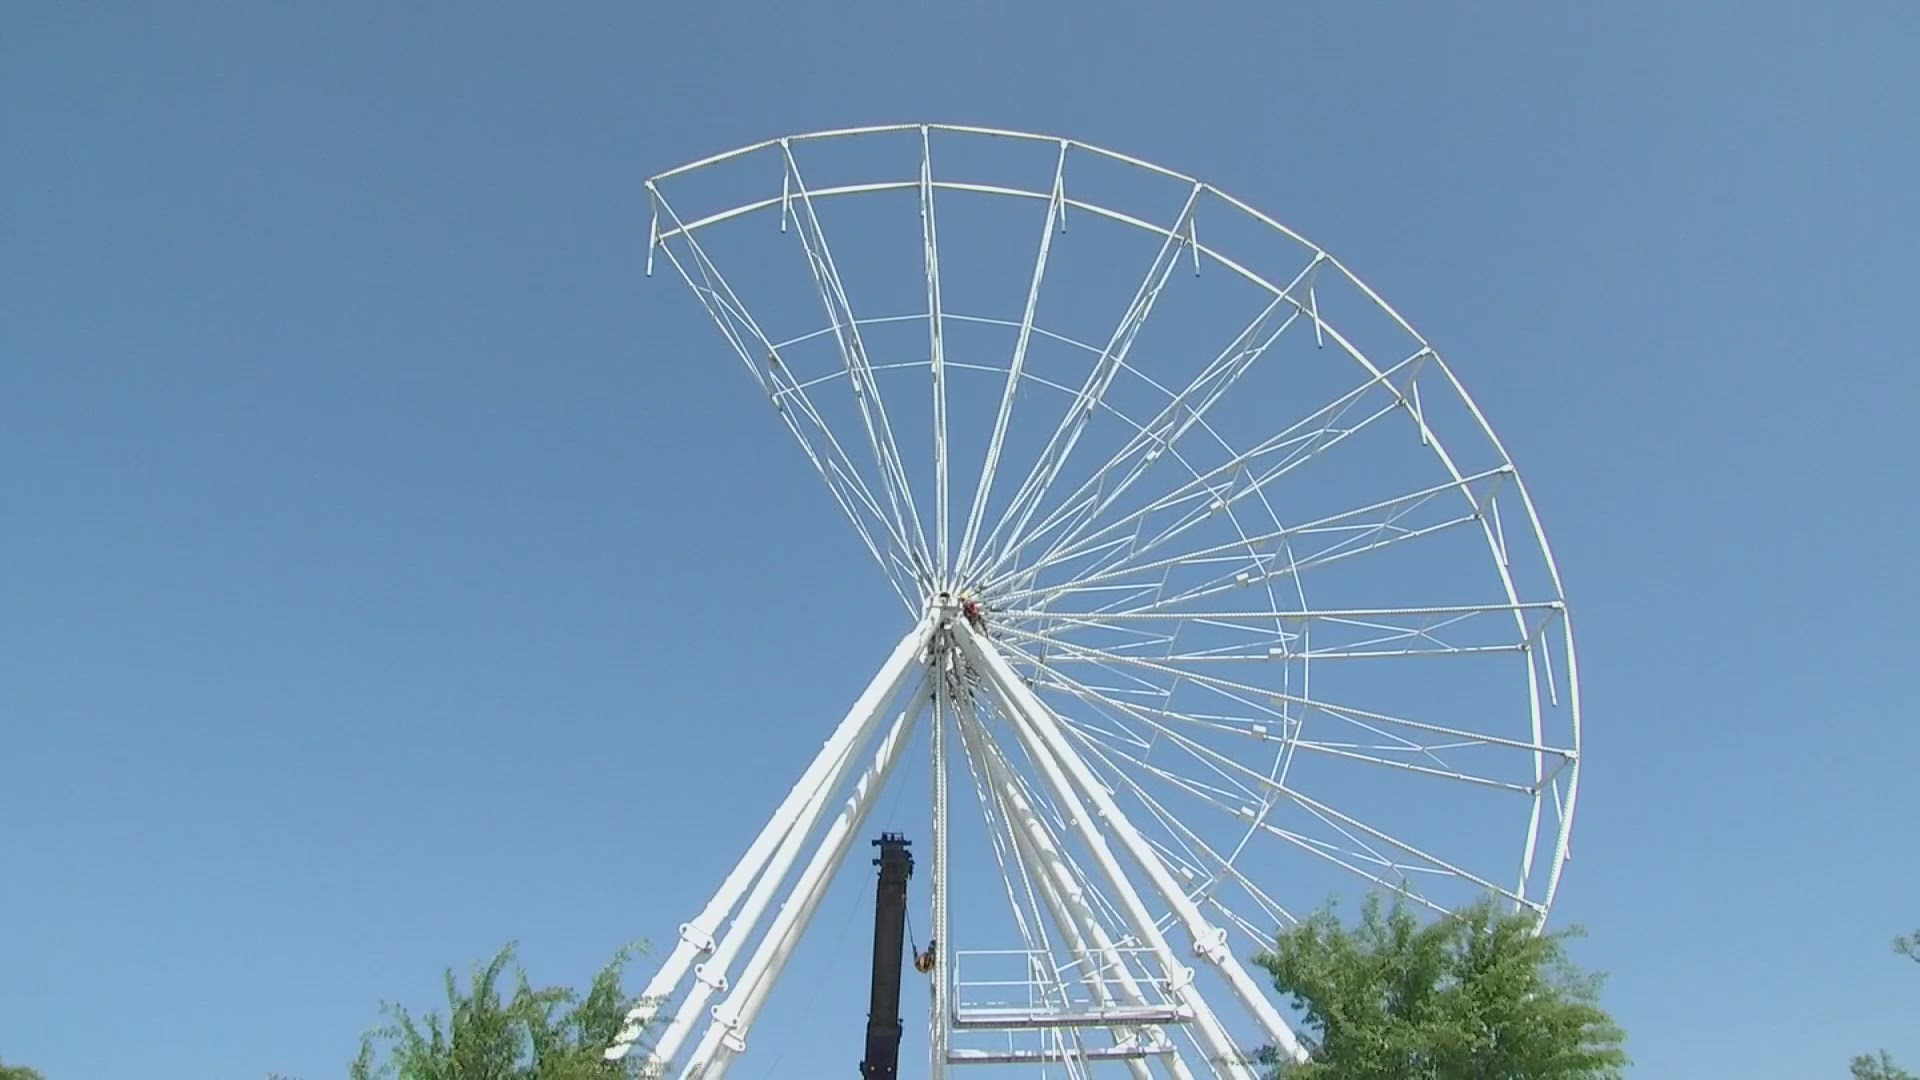 The Ferris wheel will open May 27 and will be at the park until the last day of the Boo at the Zoo on Oct. 29.